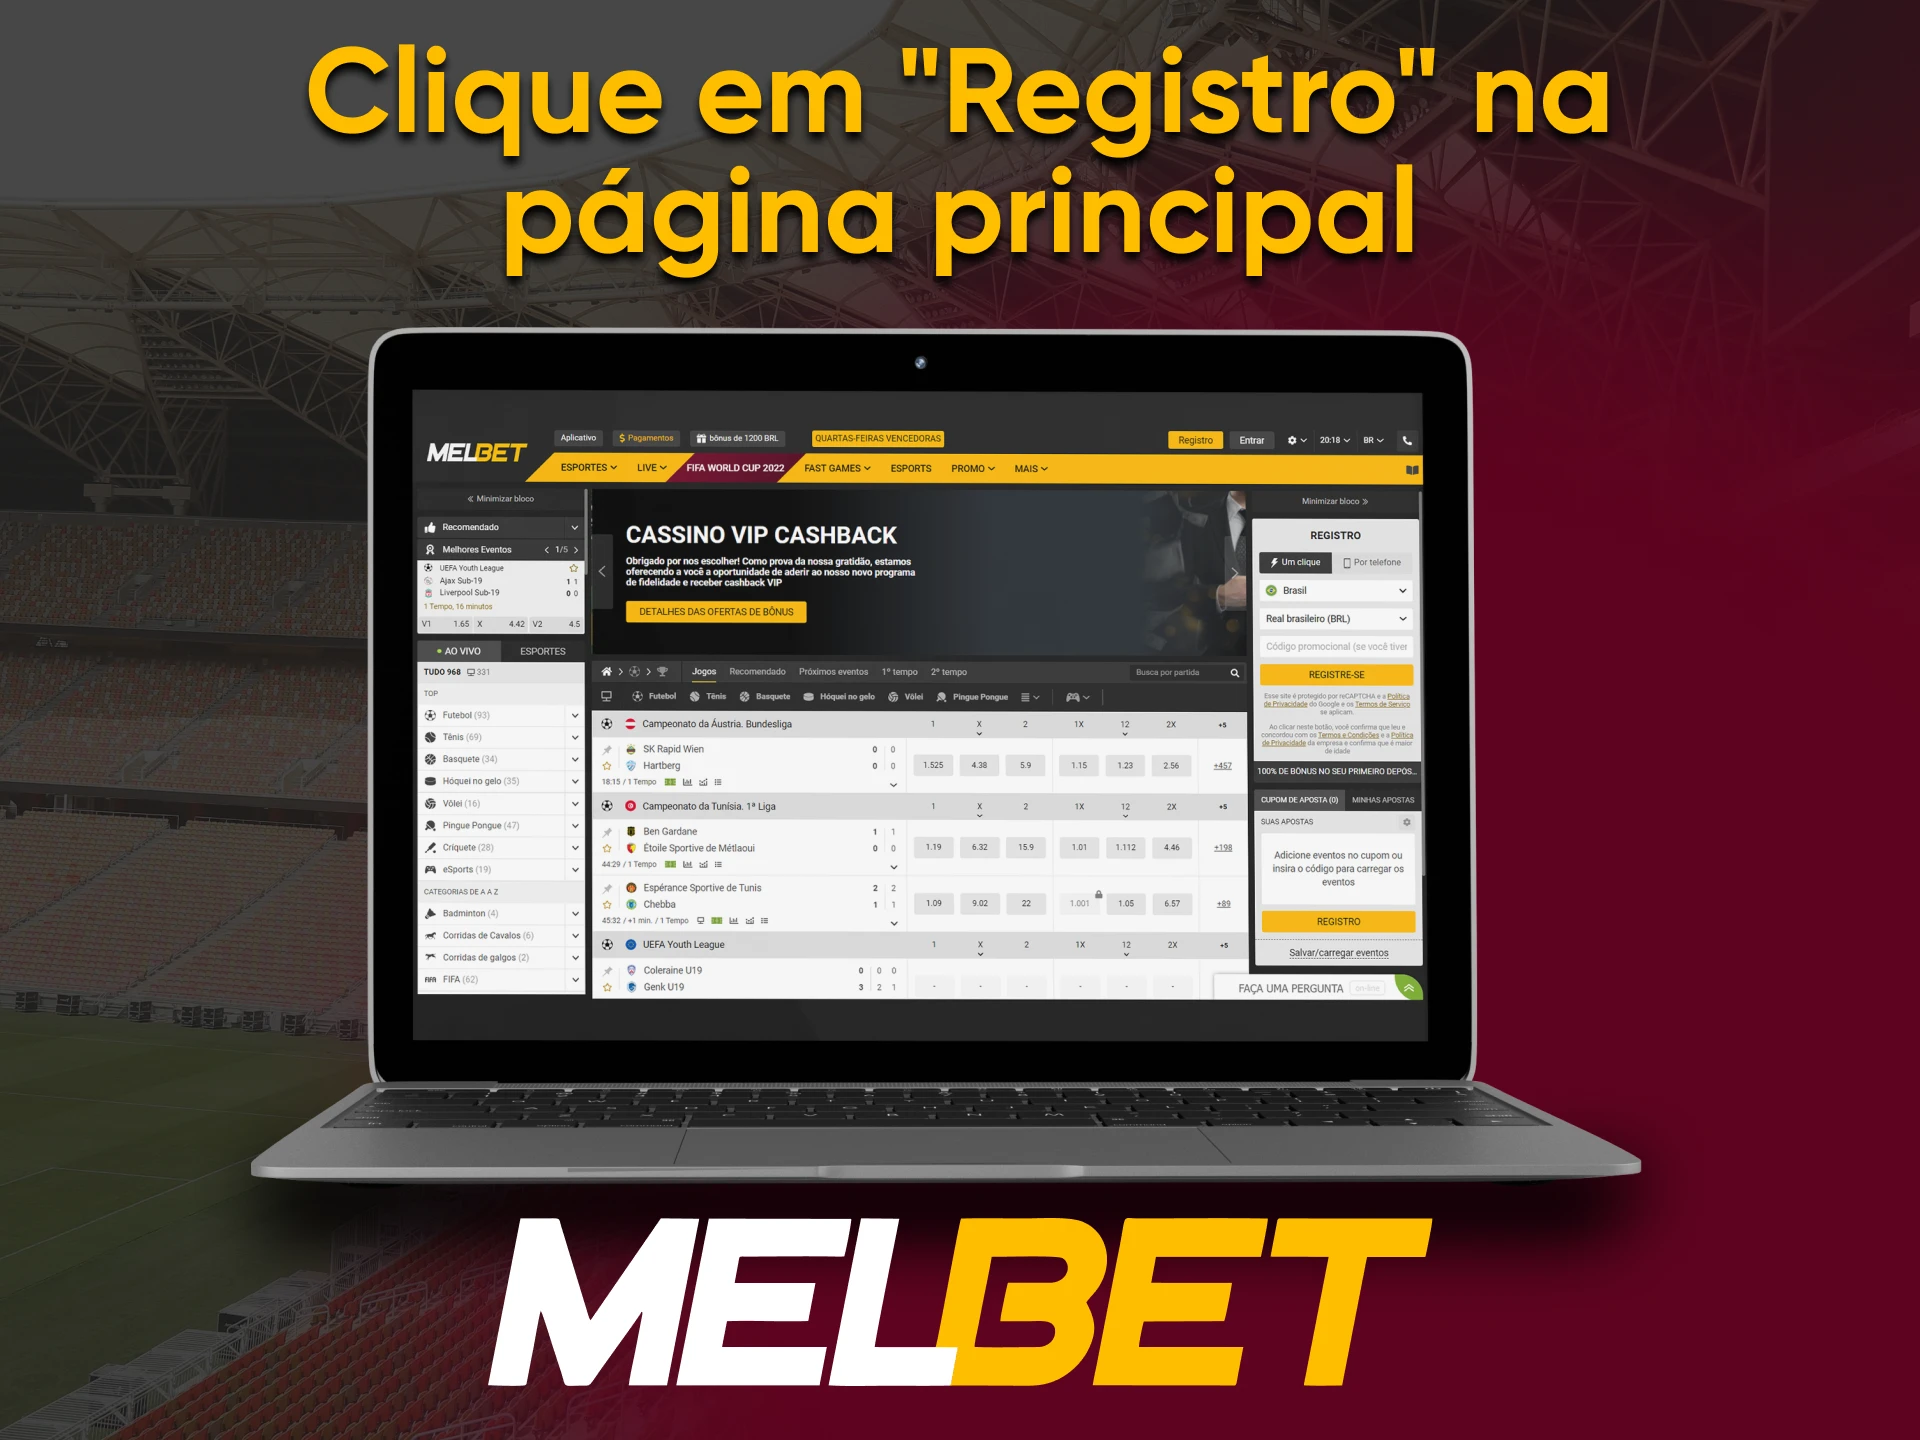 Register with Melbet.